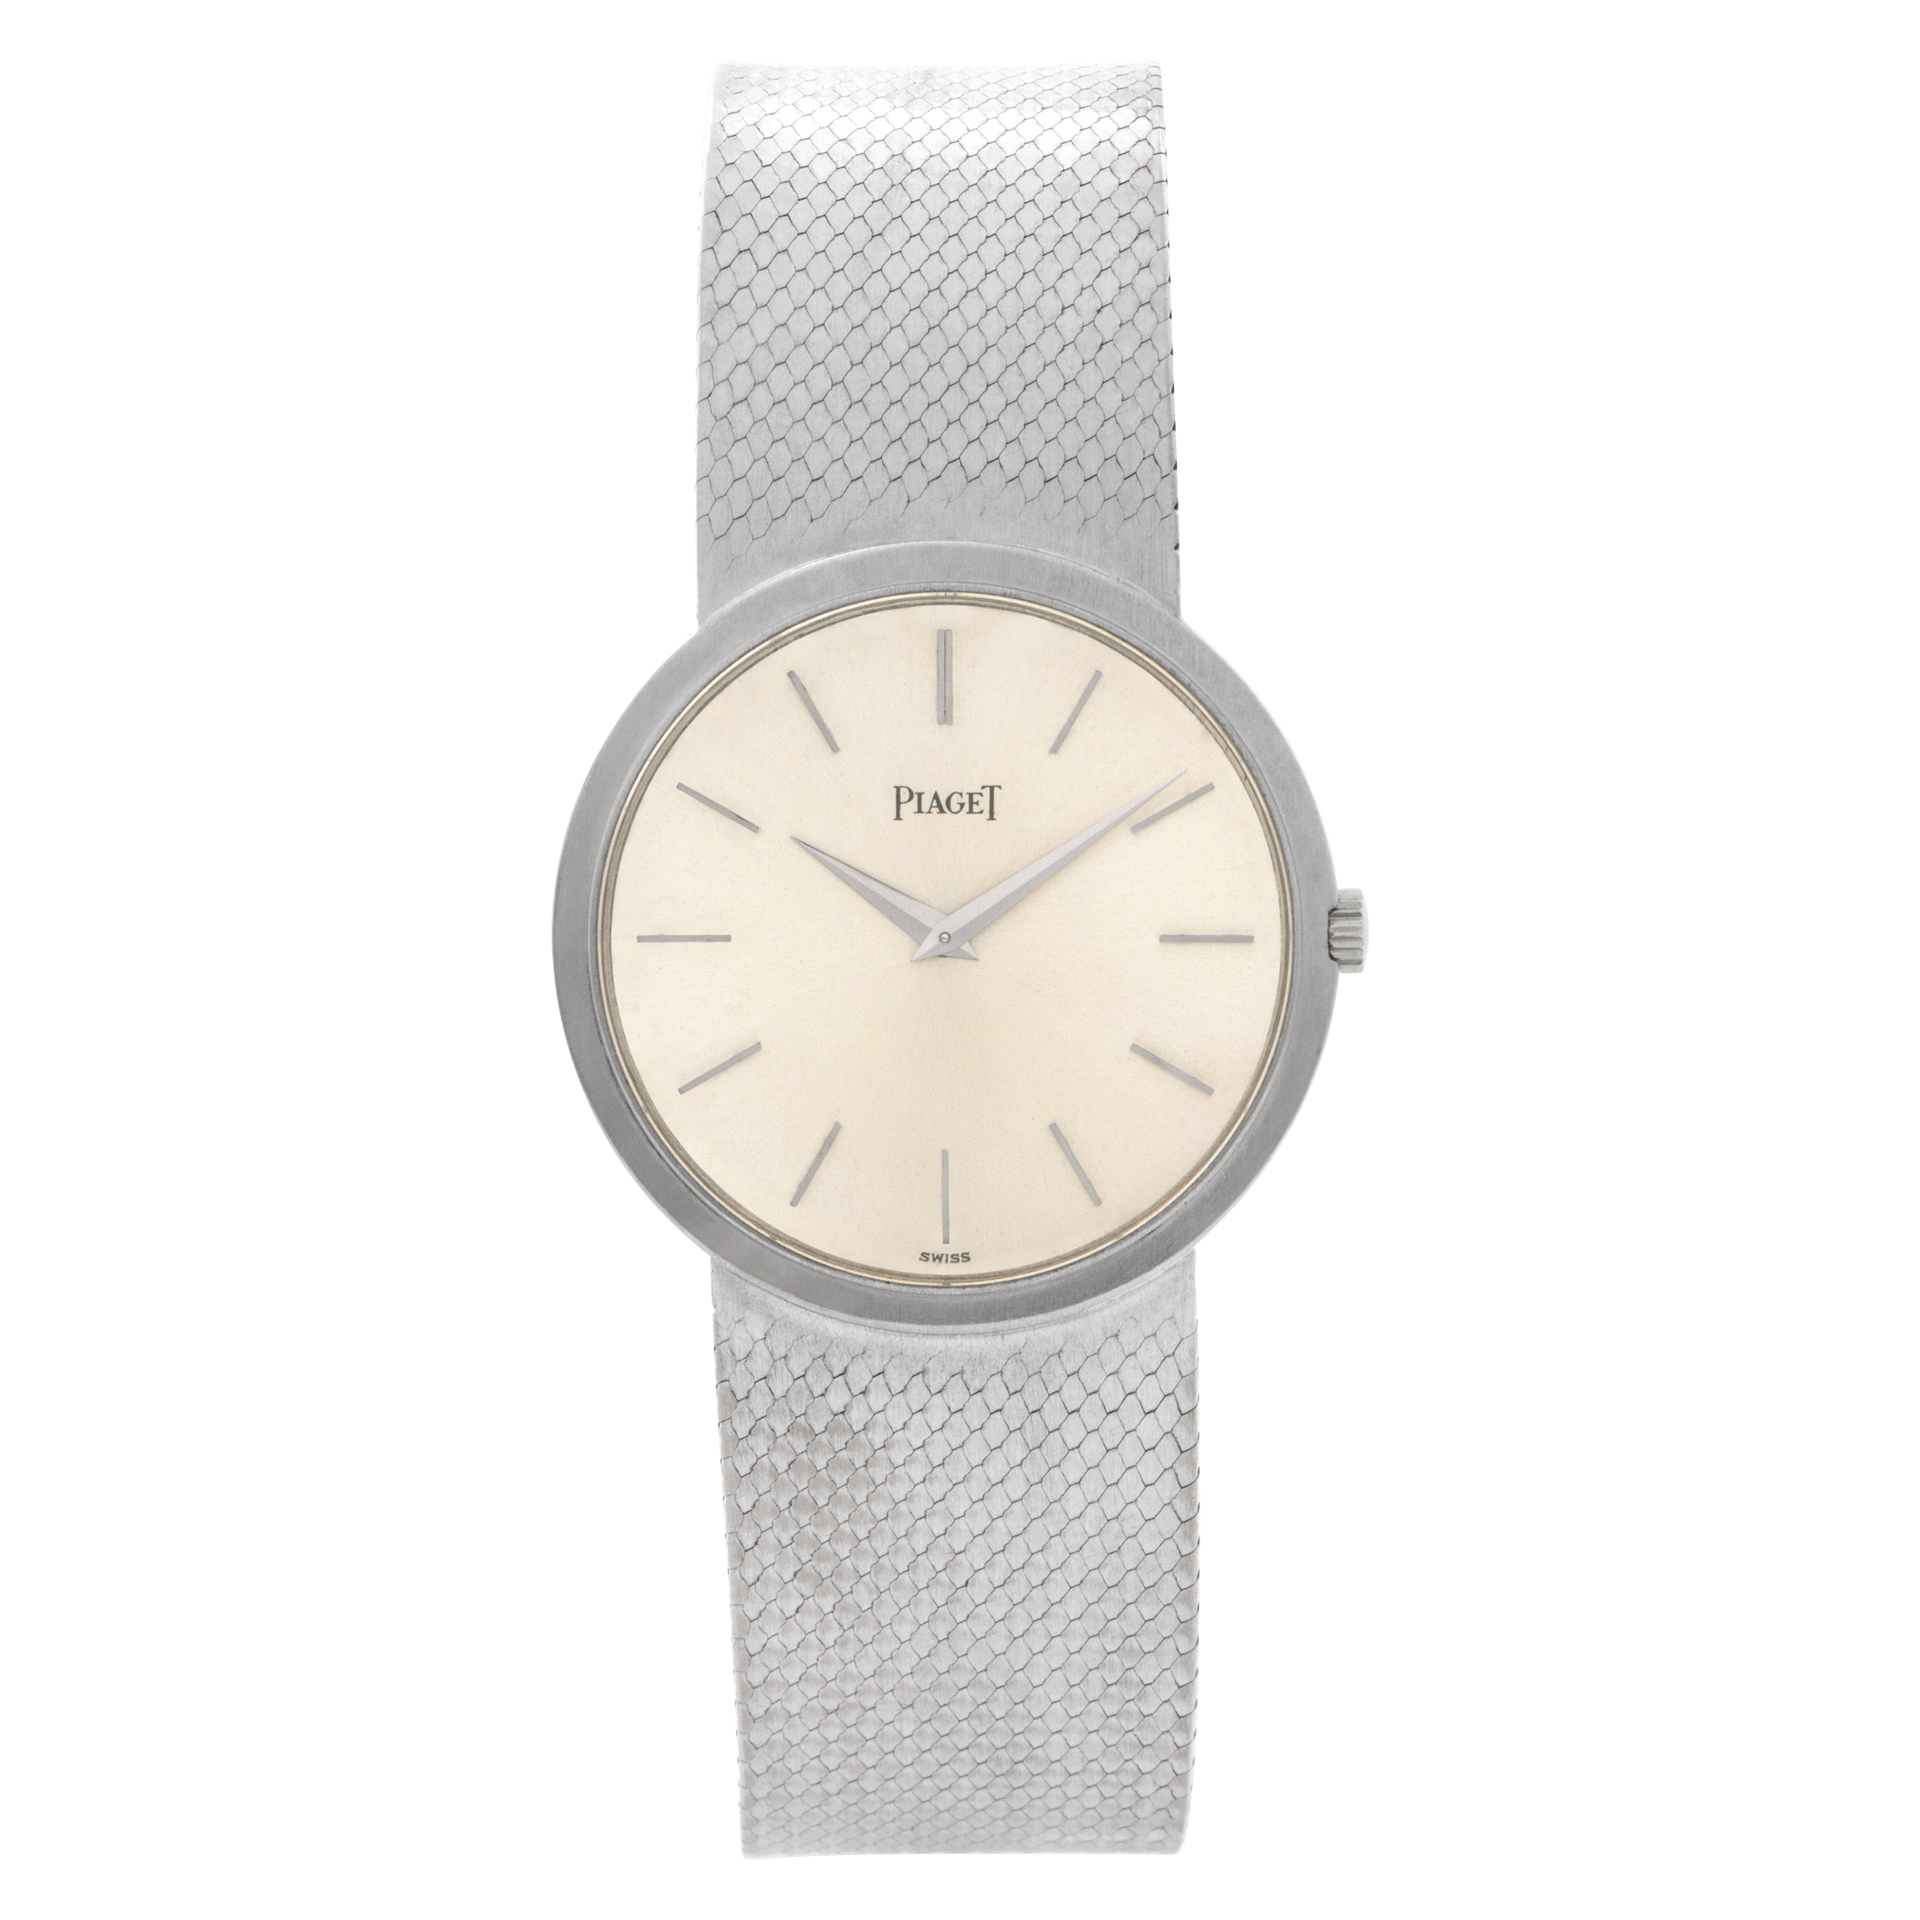 Piaget Classic 32mm 9633 image 1